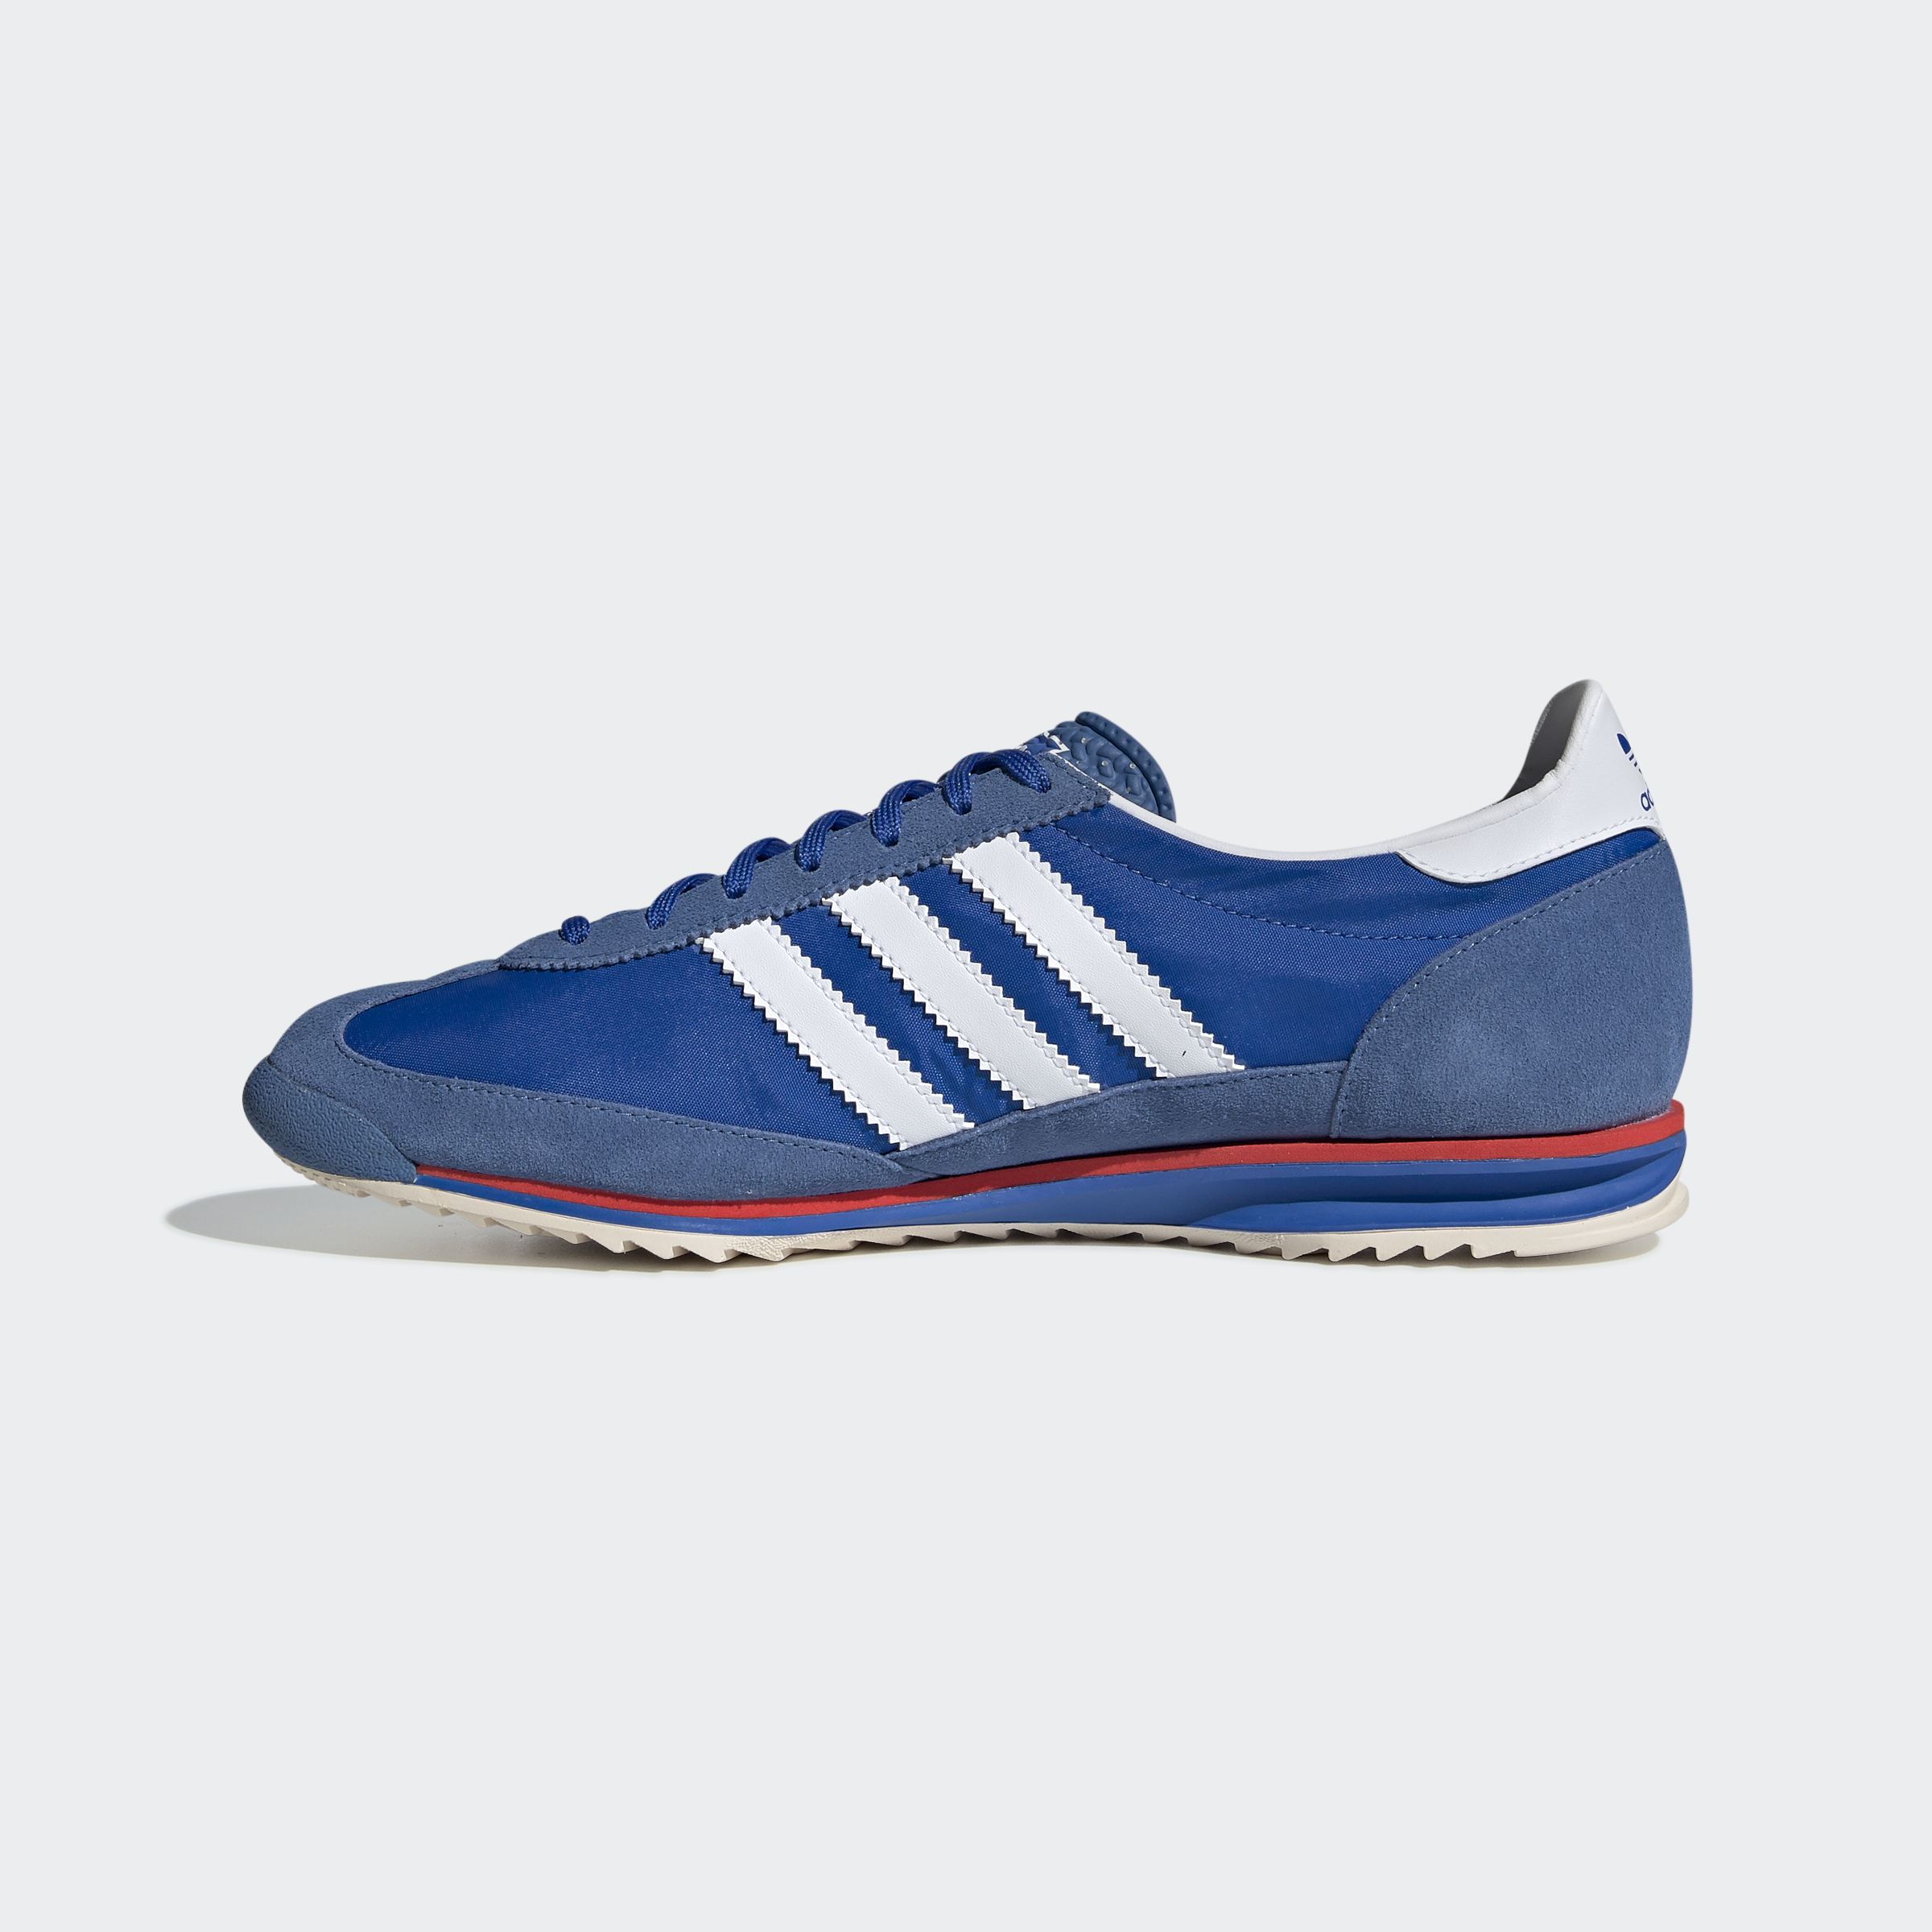 adidas SL 72 Shoes Athletic & Sneakers | eBay